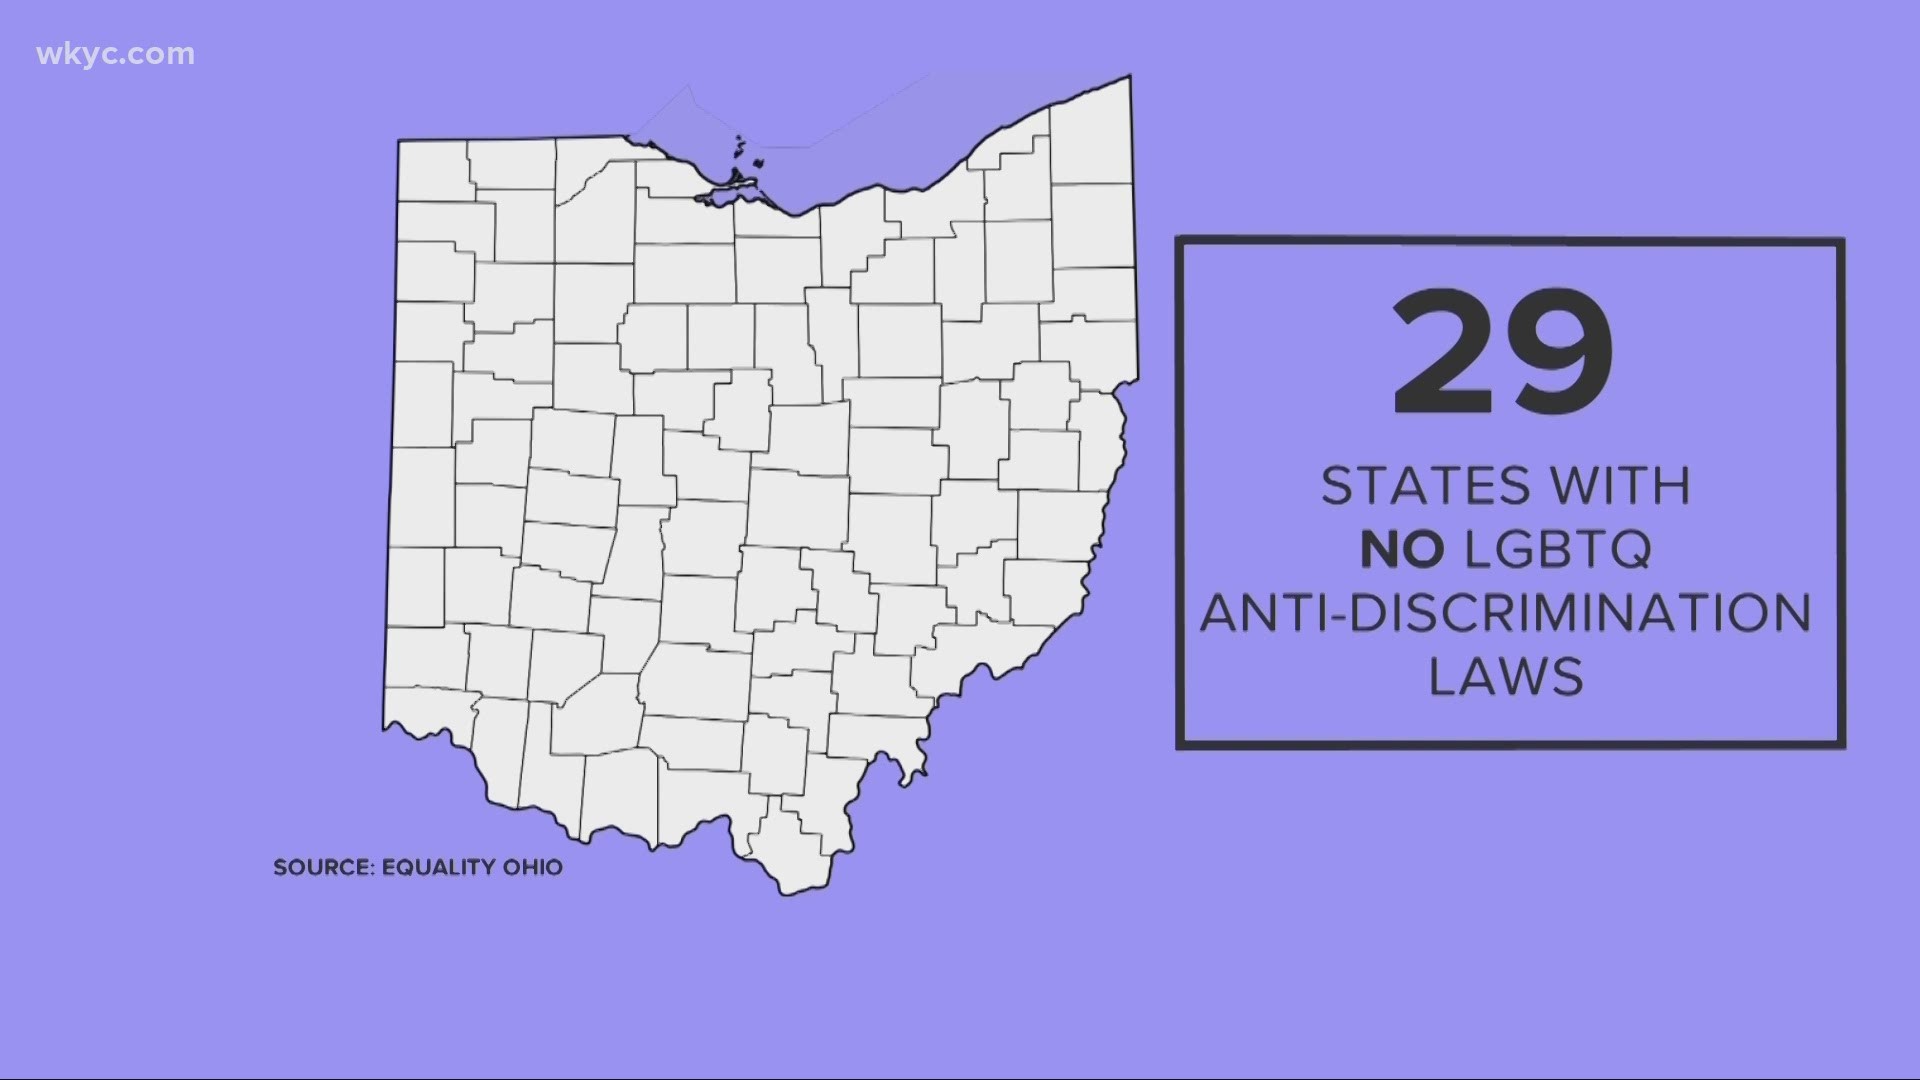 One Ohio legislator is working hard to pass an anti-discrimination bill for LGBT people in Ohio. The Buckeye State is one of 29 states without protections.